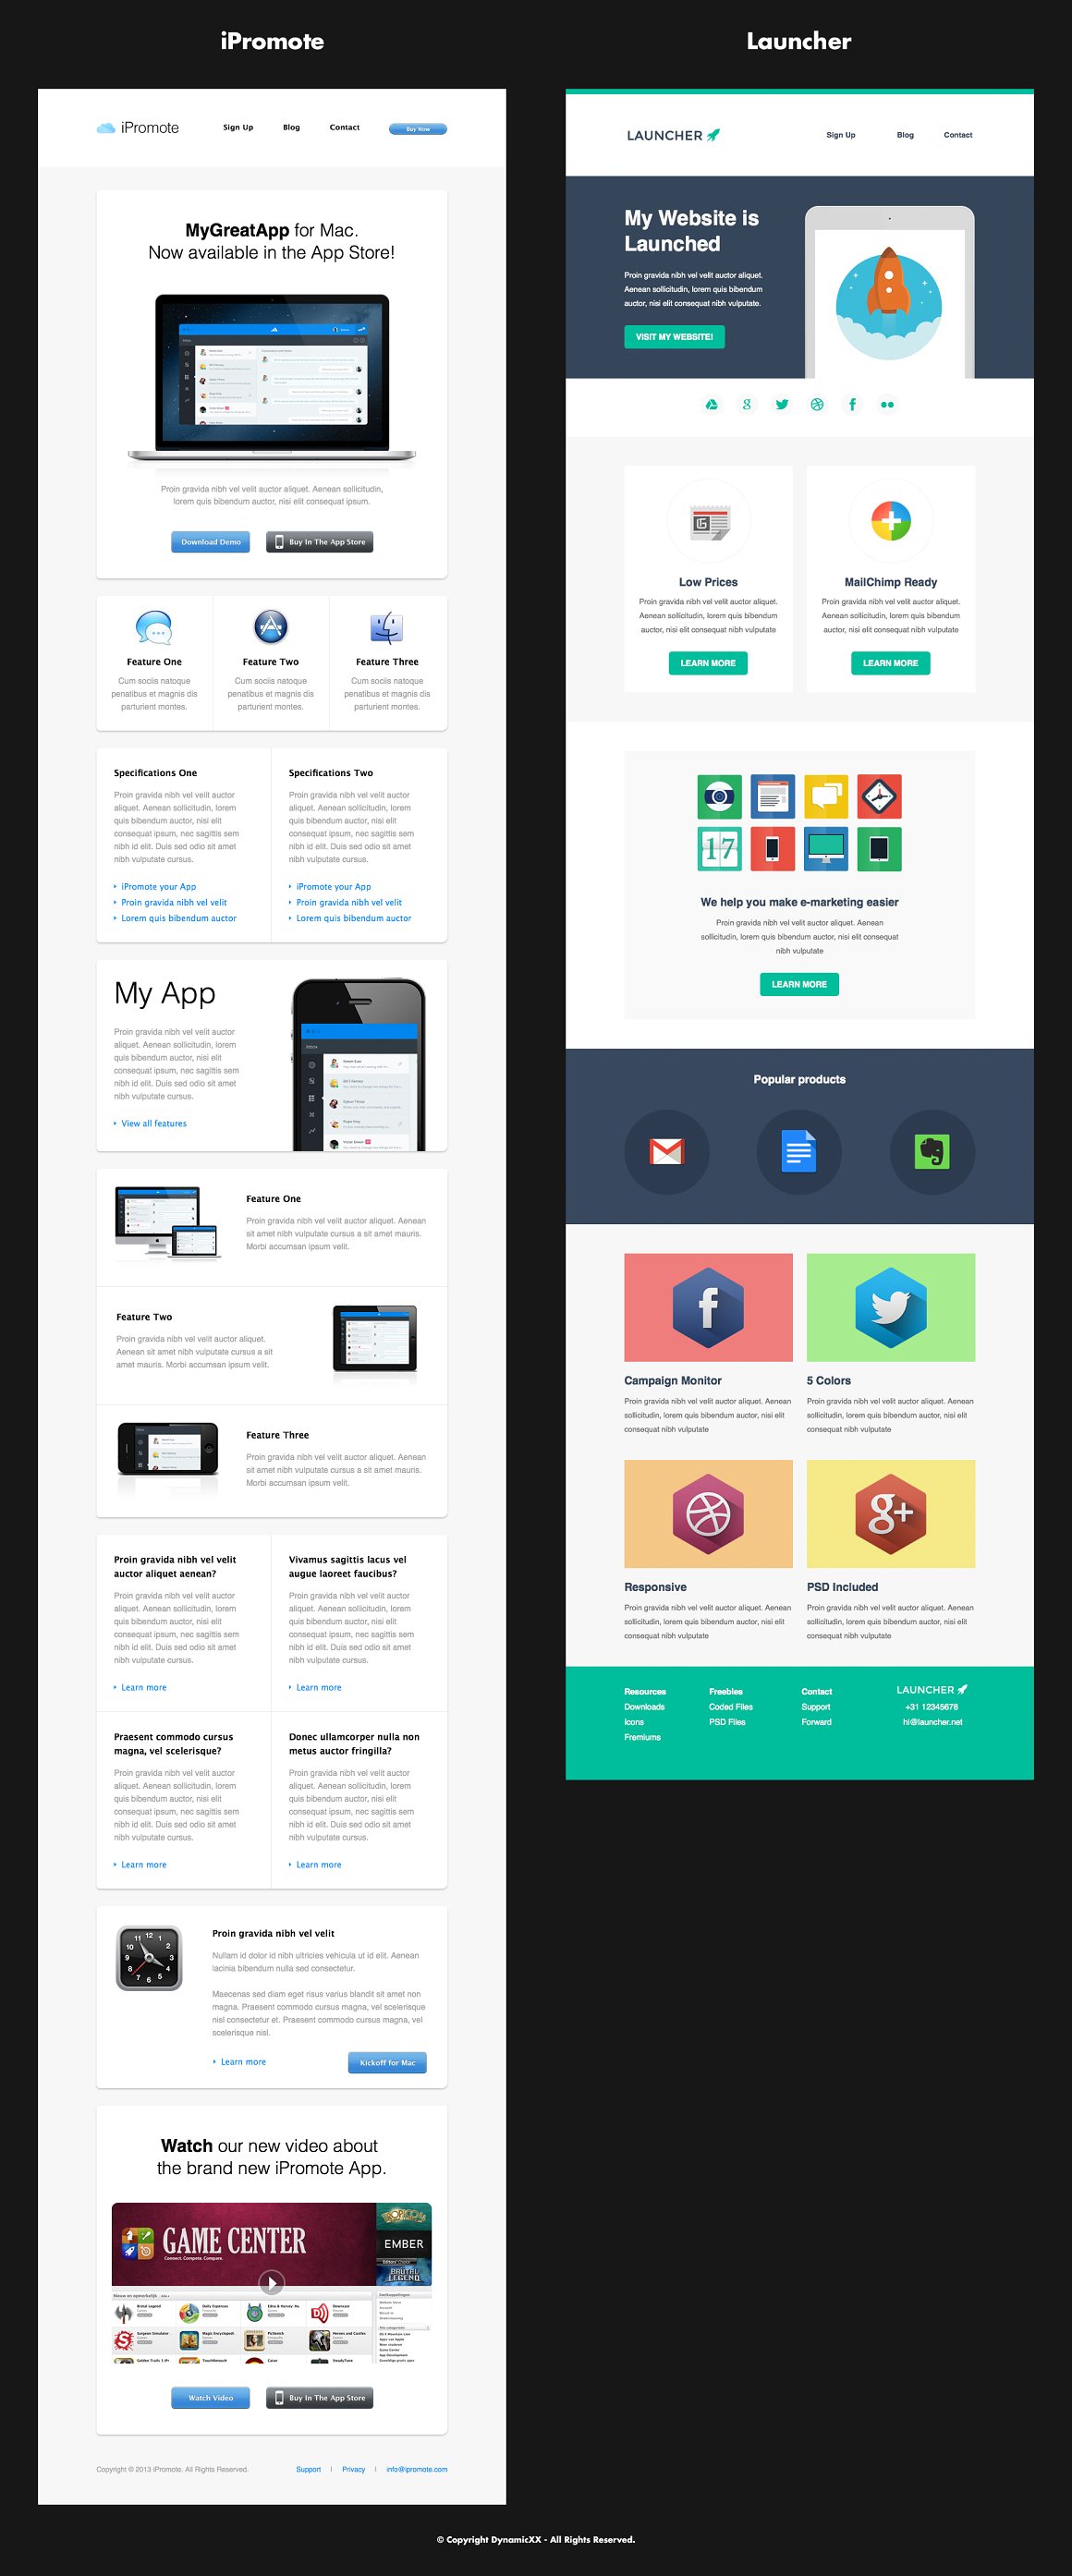 Bundle of images of colorful email design templates.